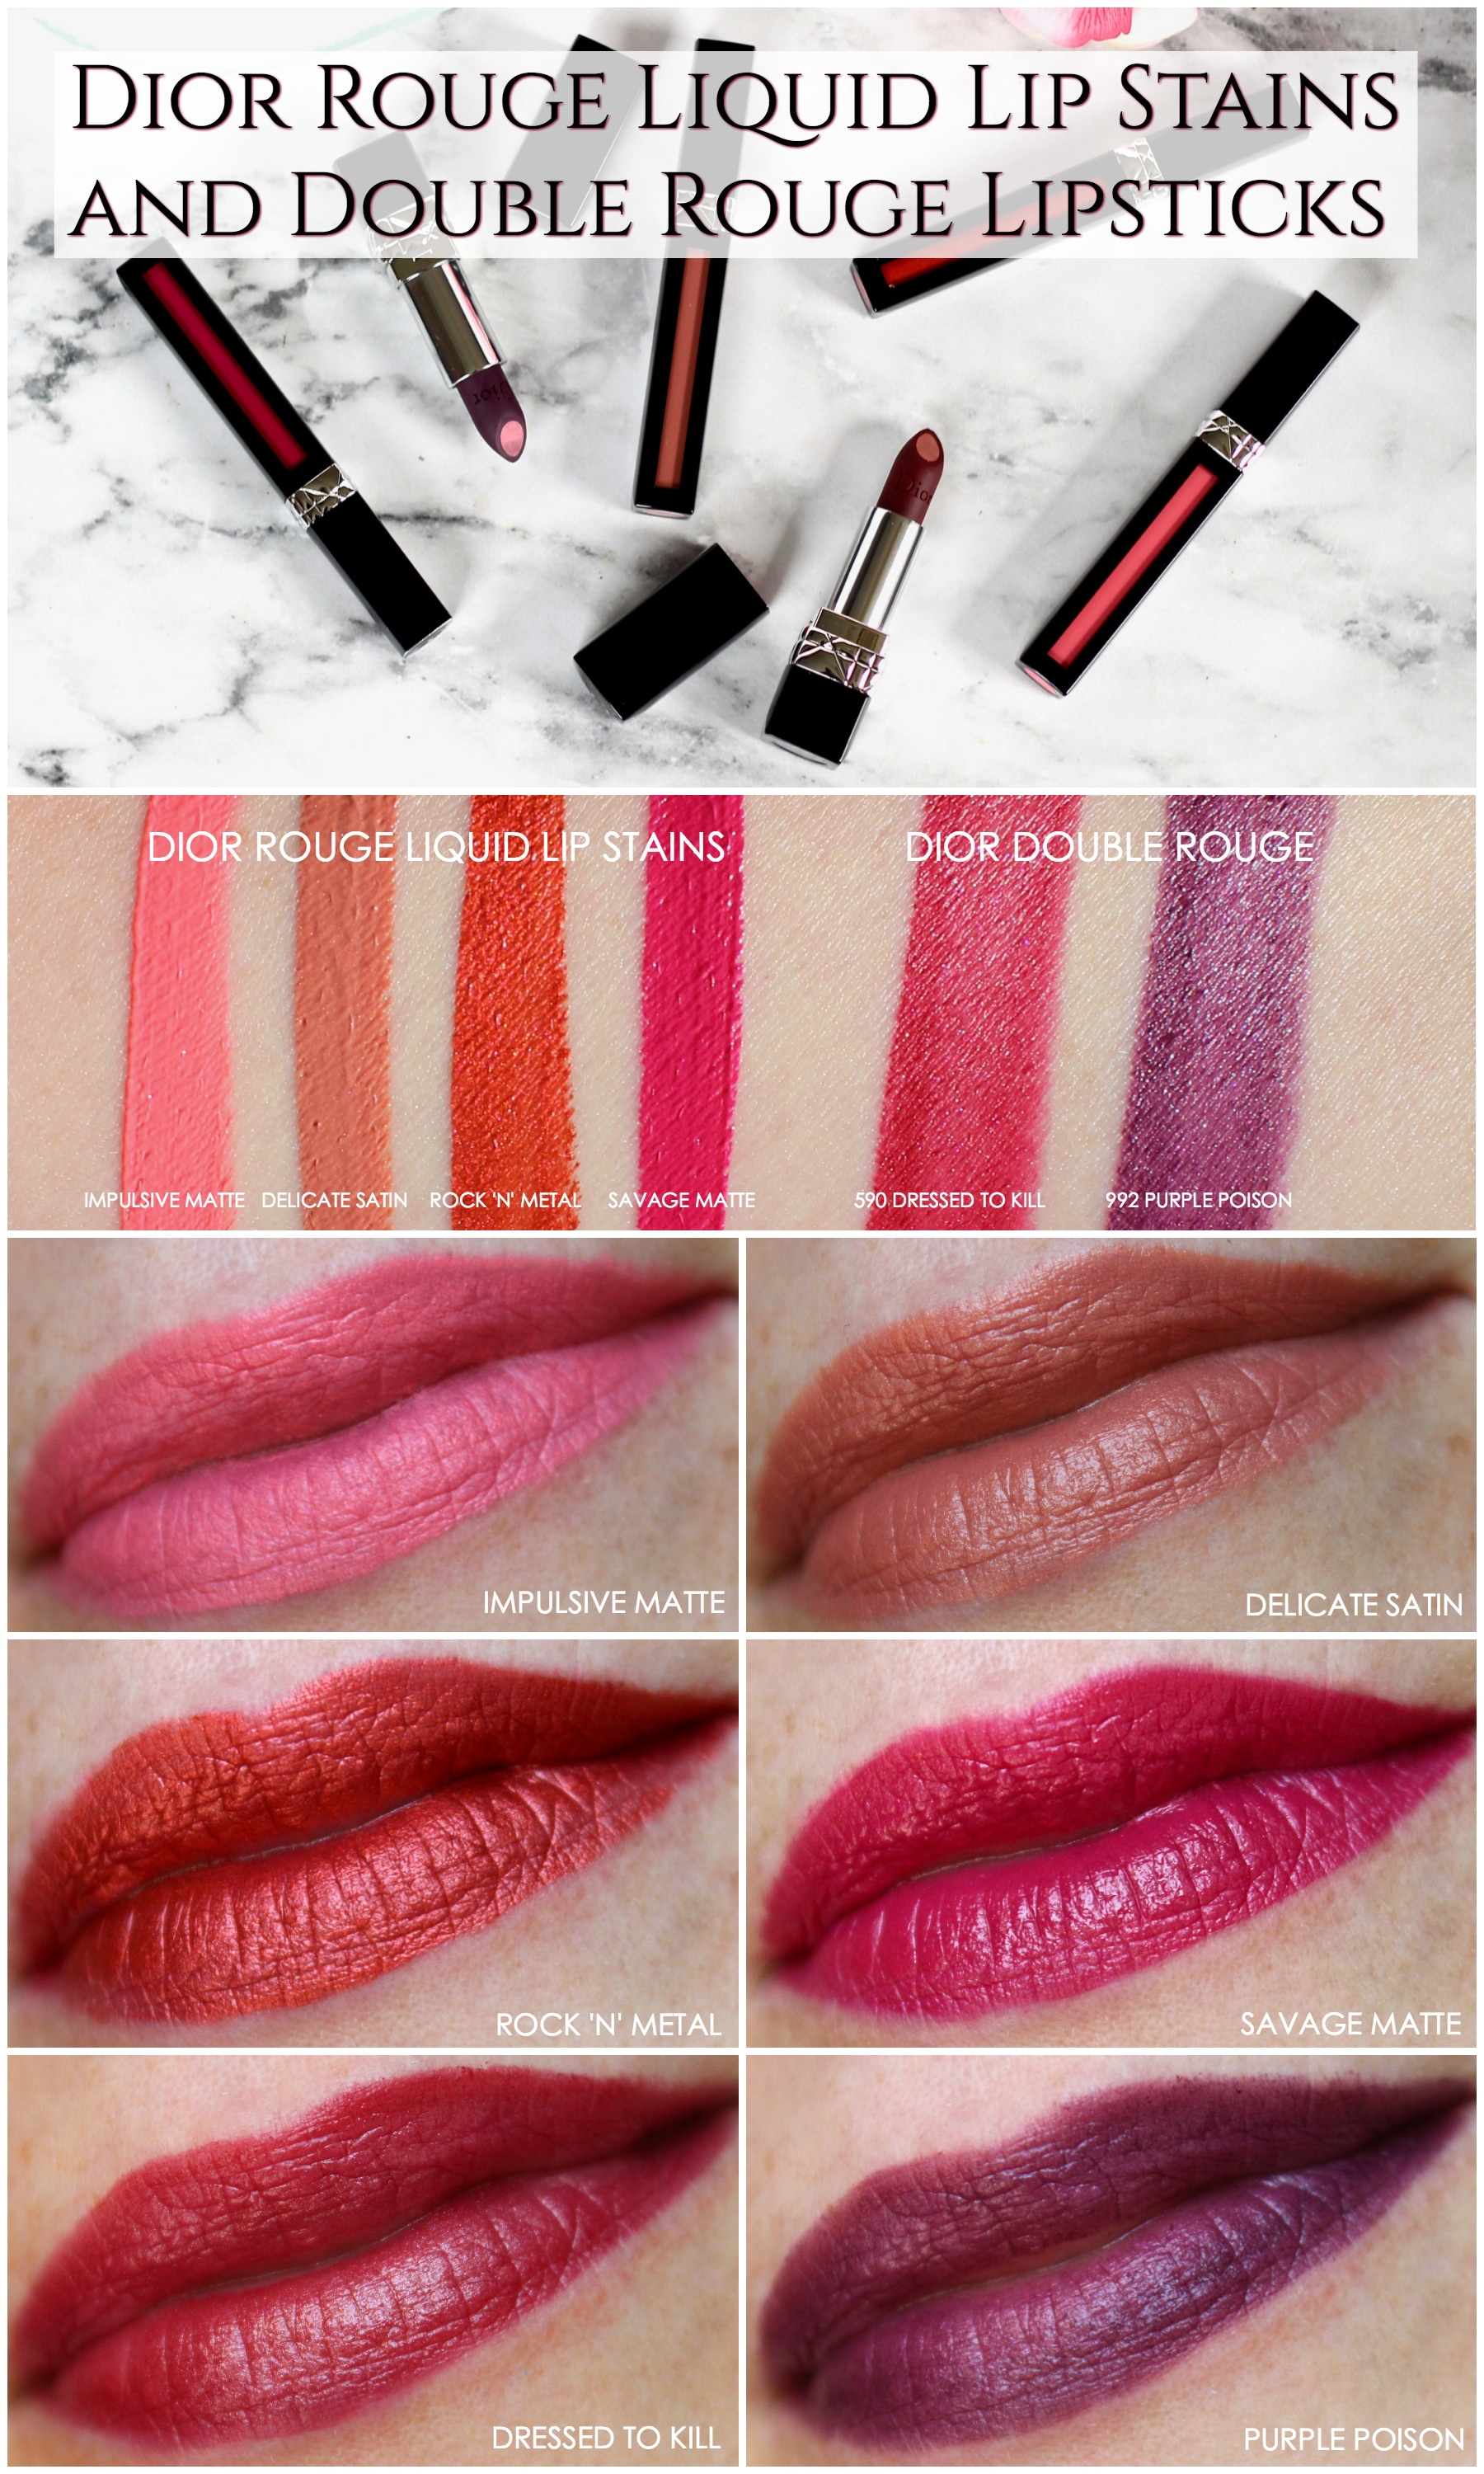 dior double rouge 992